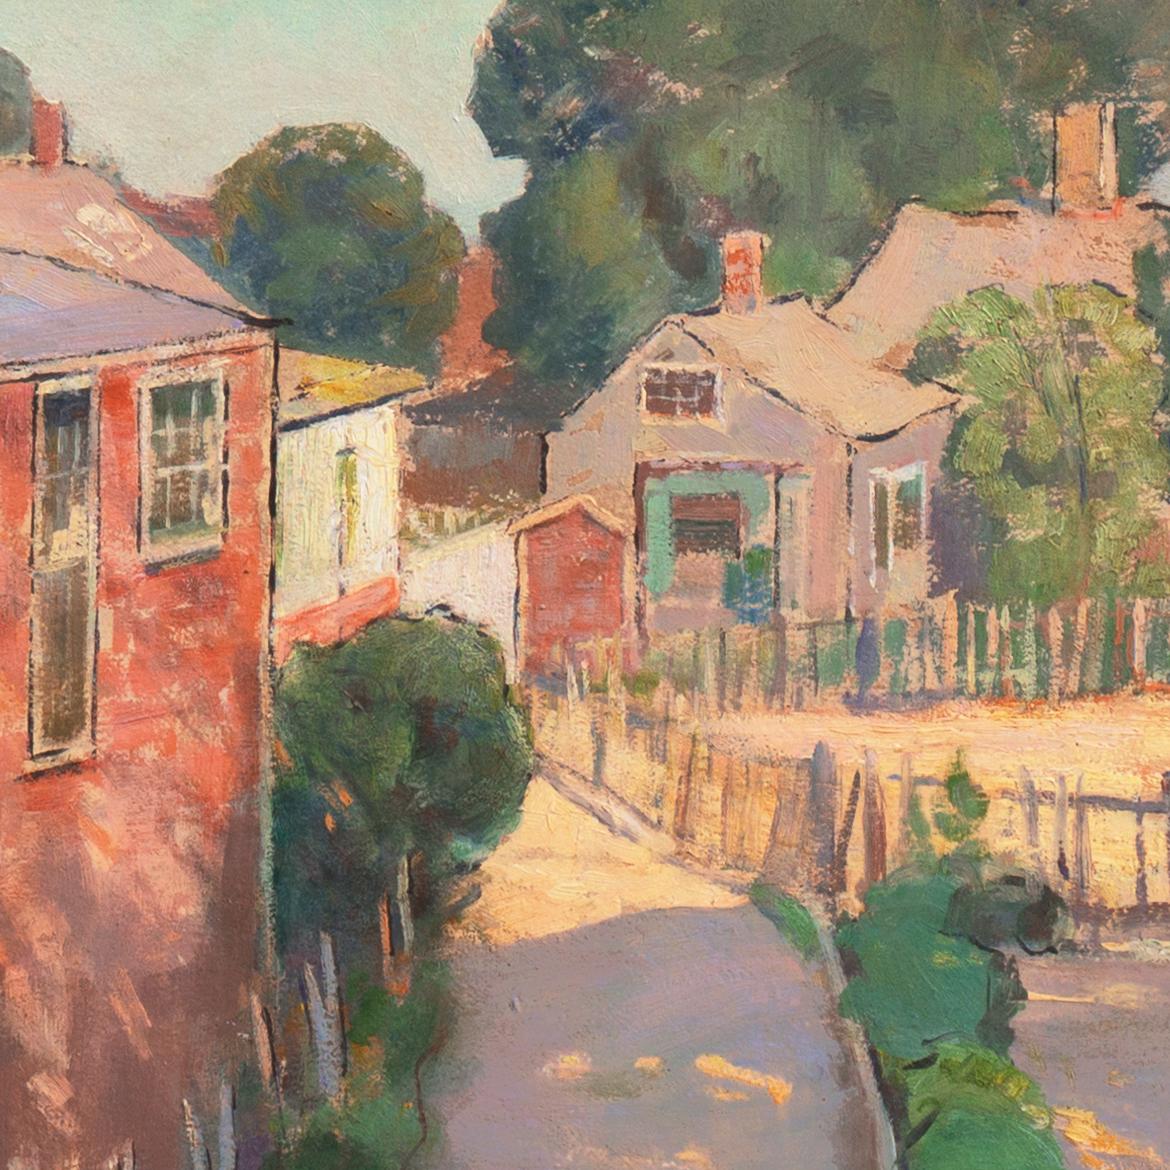 Signed lower left, 'Pauline Palmer' (American, 1867-1938) and painted circa 1915, two years after the artist's first solo exhibition at the Art Institute of Chicago. 
Exhibited: Chicago Galleries Association and titled, 'Sunny Yards' (attached,